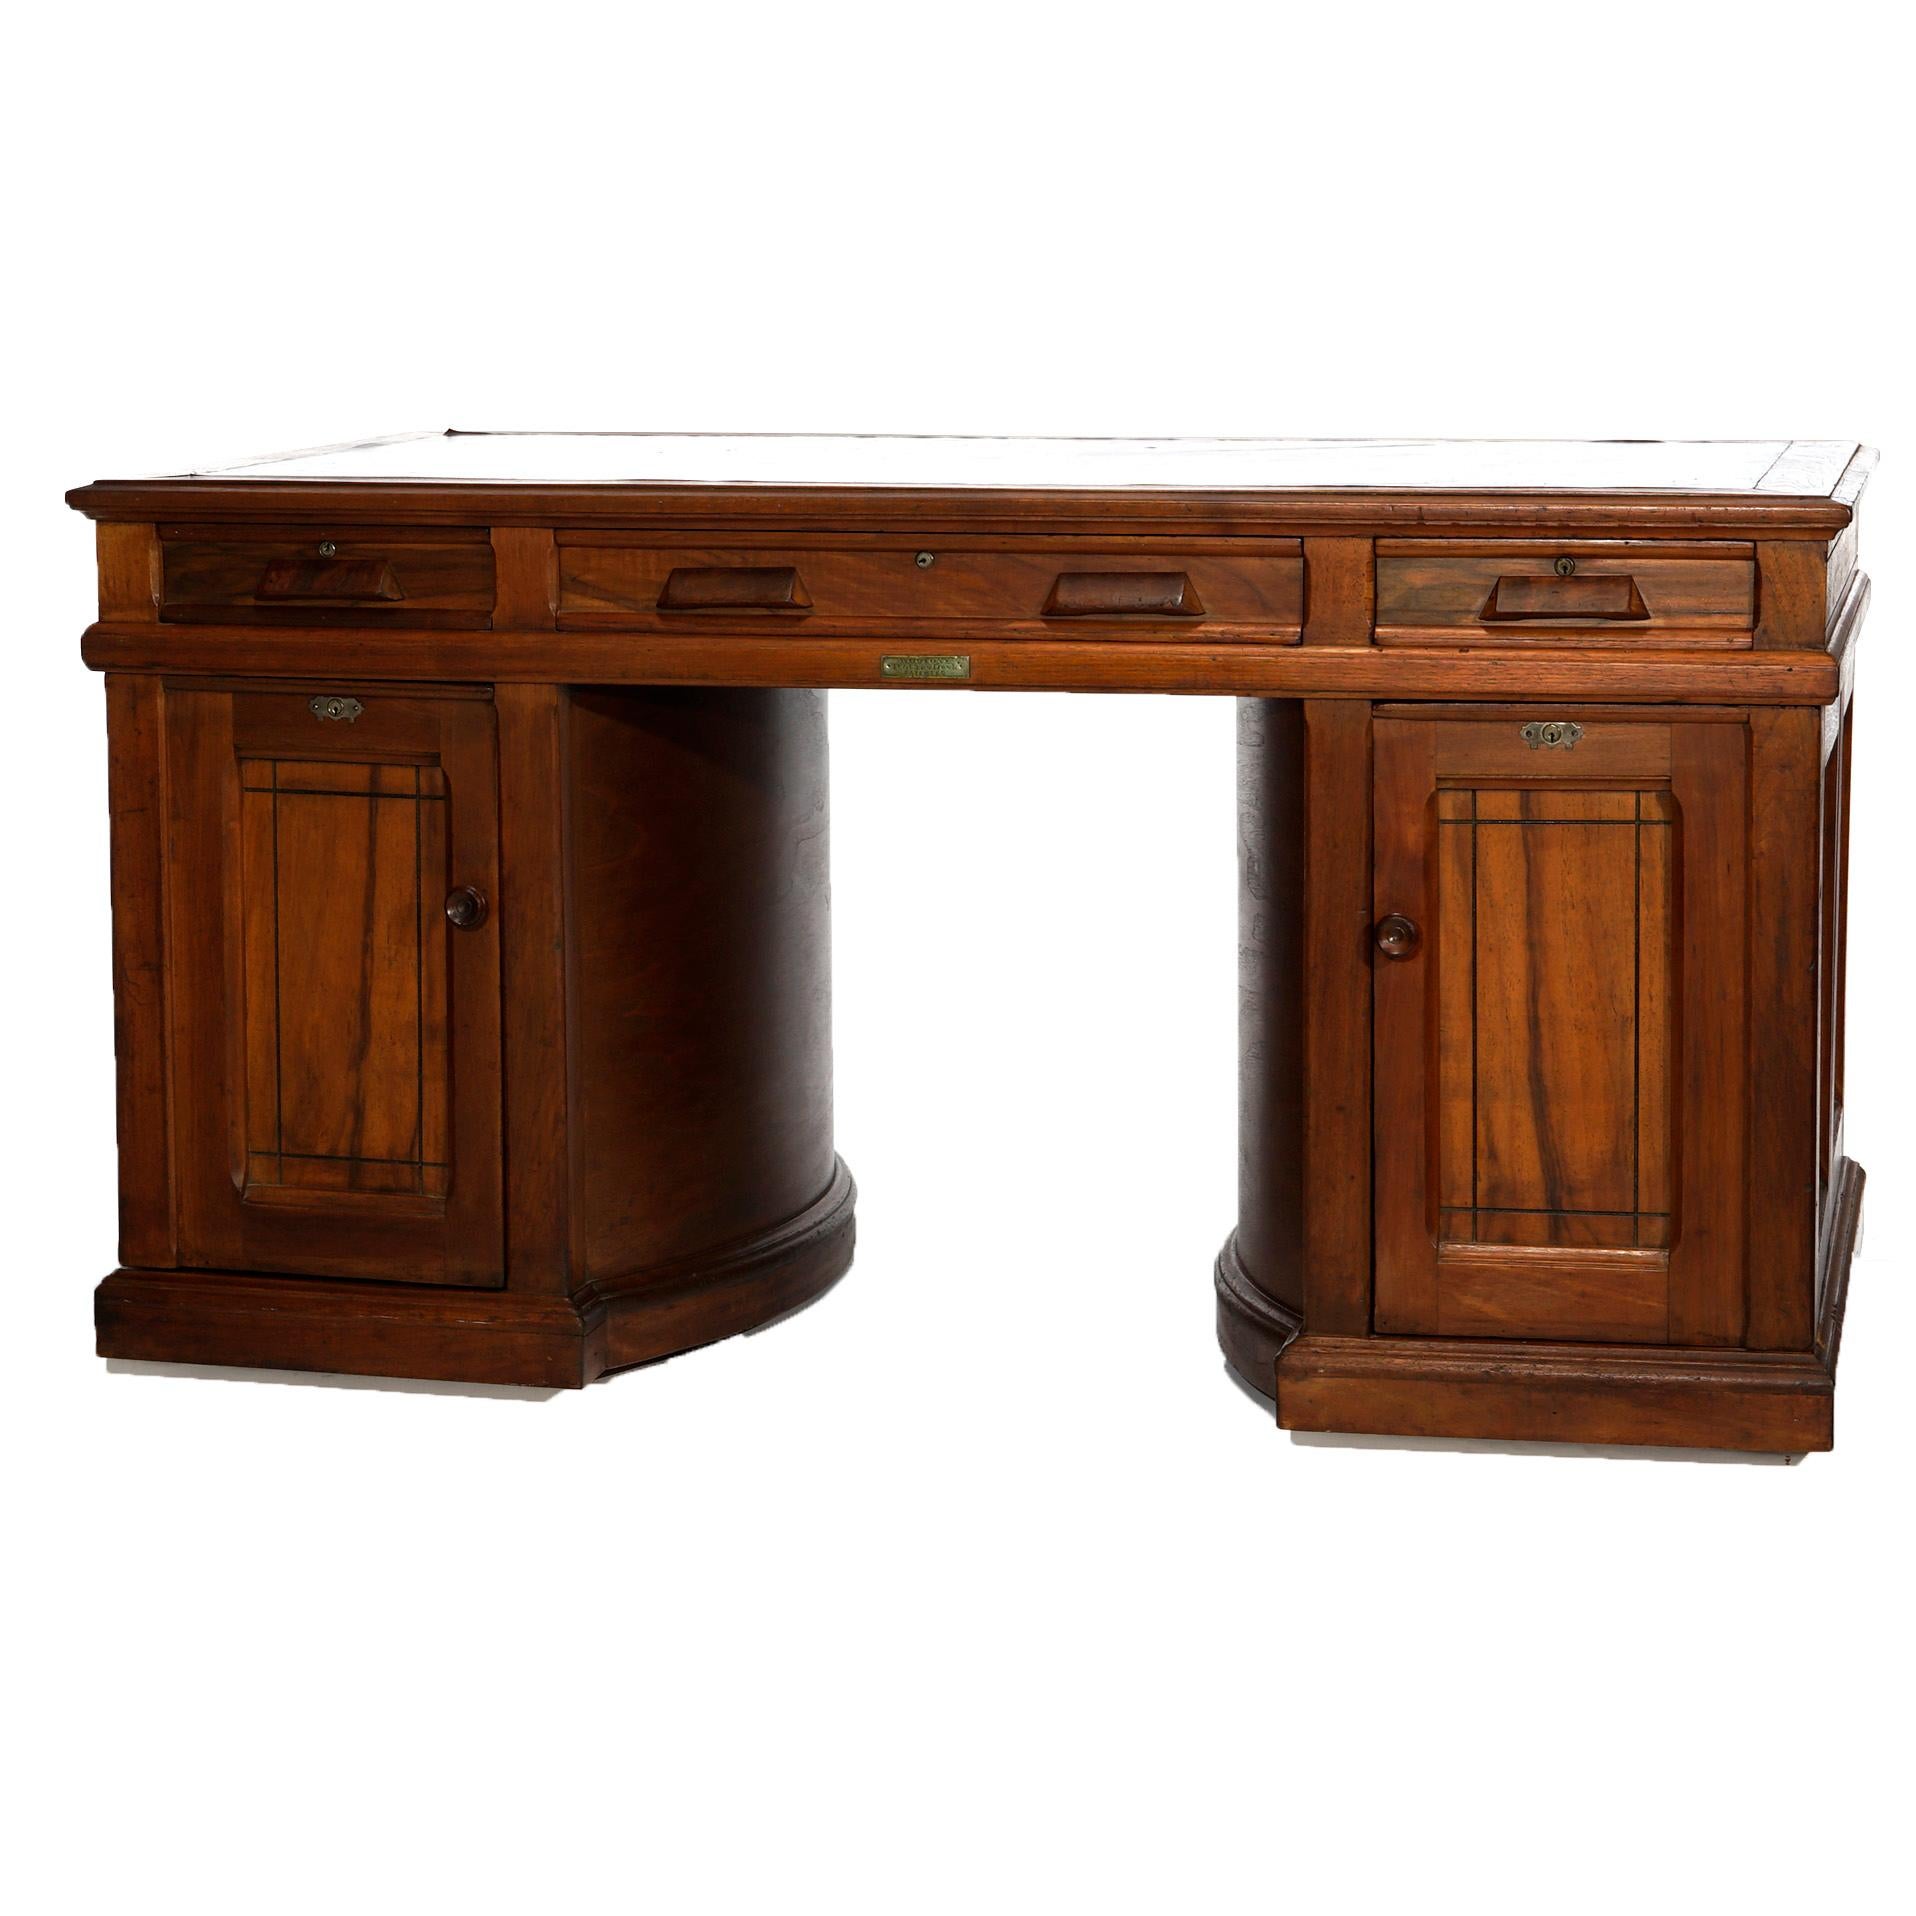 An antique rotary desk by Wooton offers walnut paneled construction with leather top over case having upper drawers and rotary sides opening to catalogue and file compartments, identifying label as photographed, c1890

Measures- 31''H x 60''W x